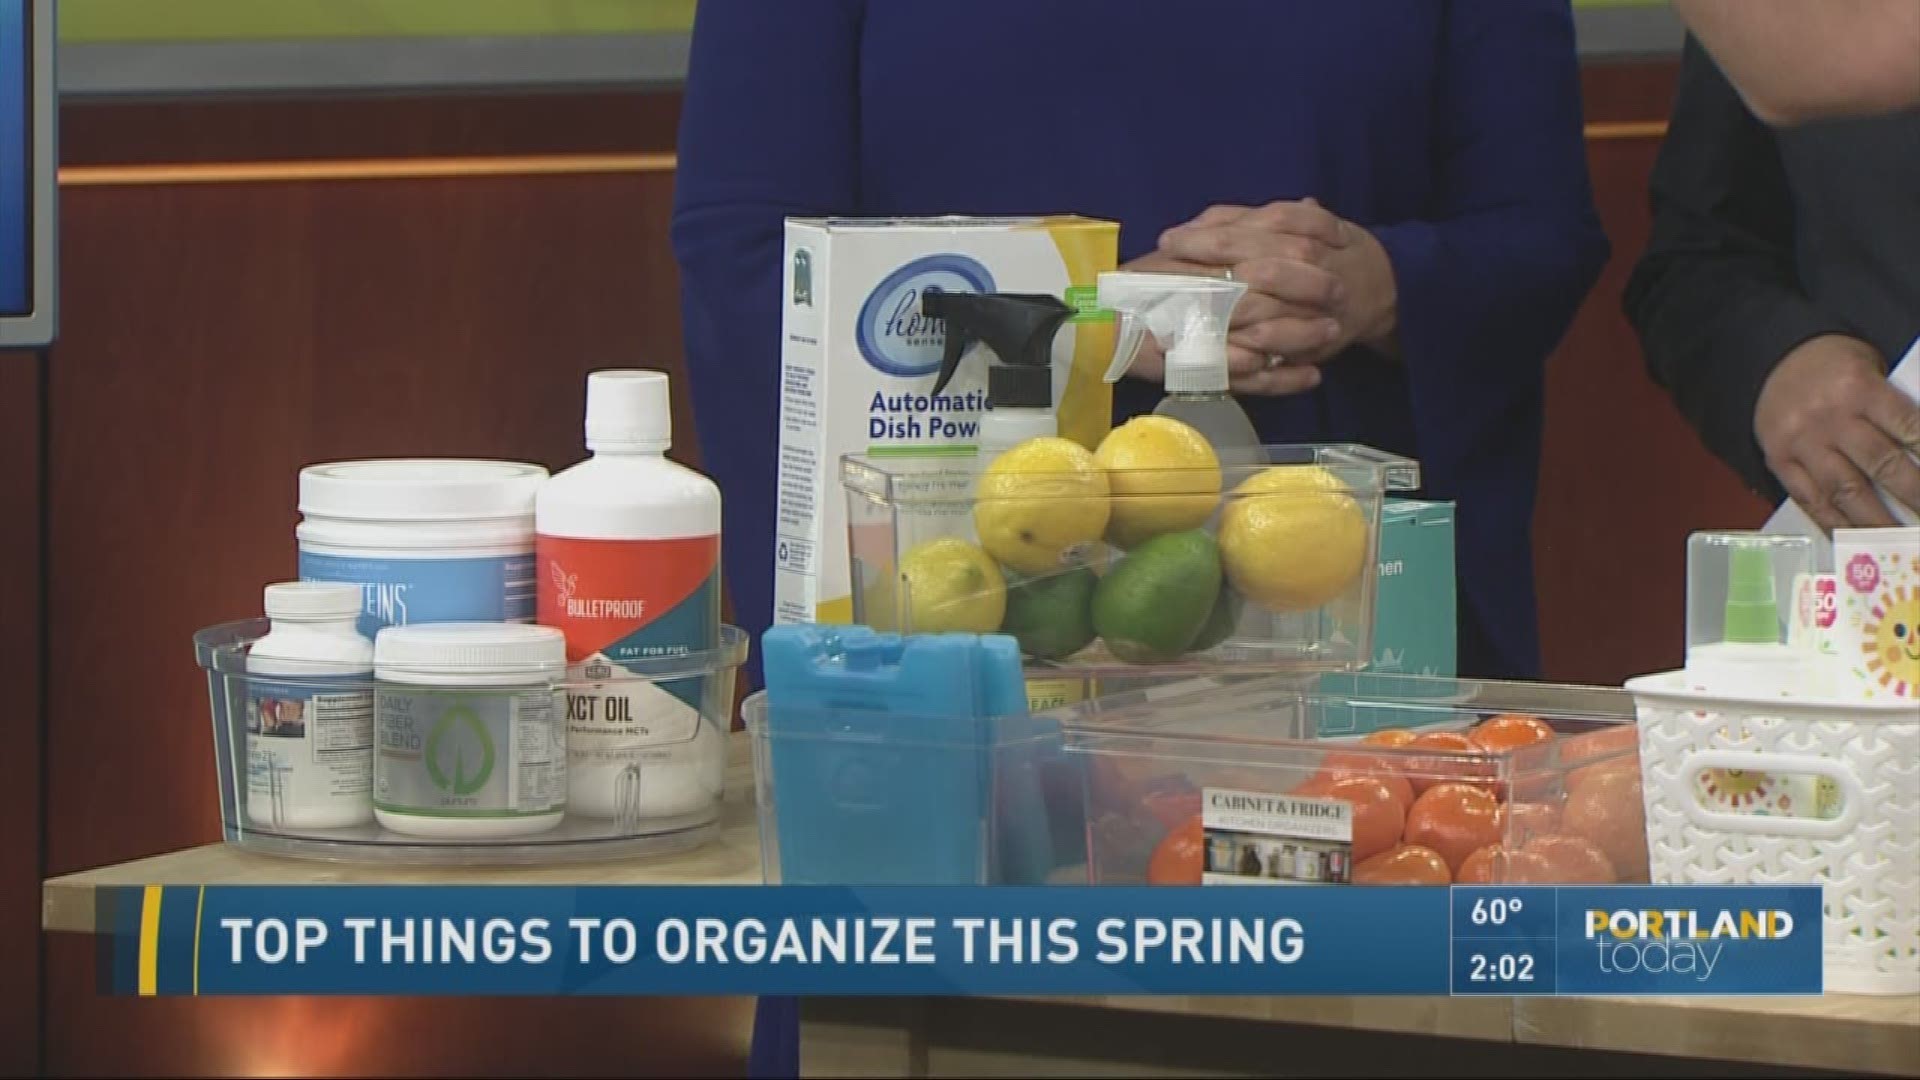 Top things to organize this spring